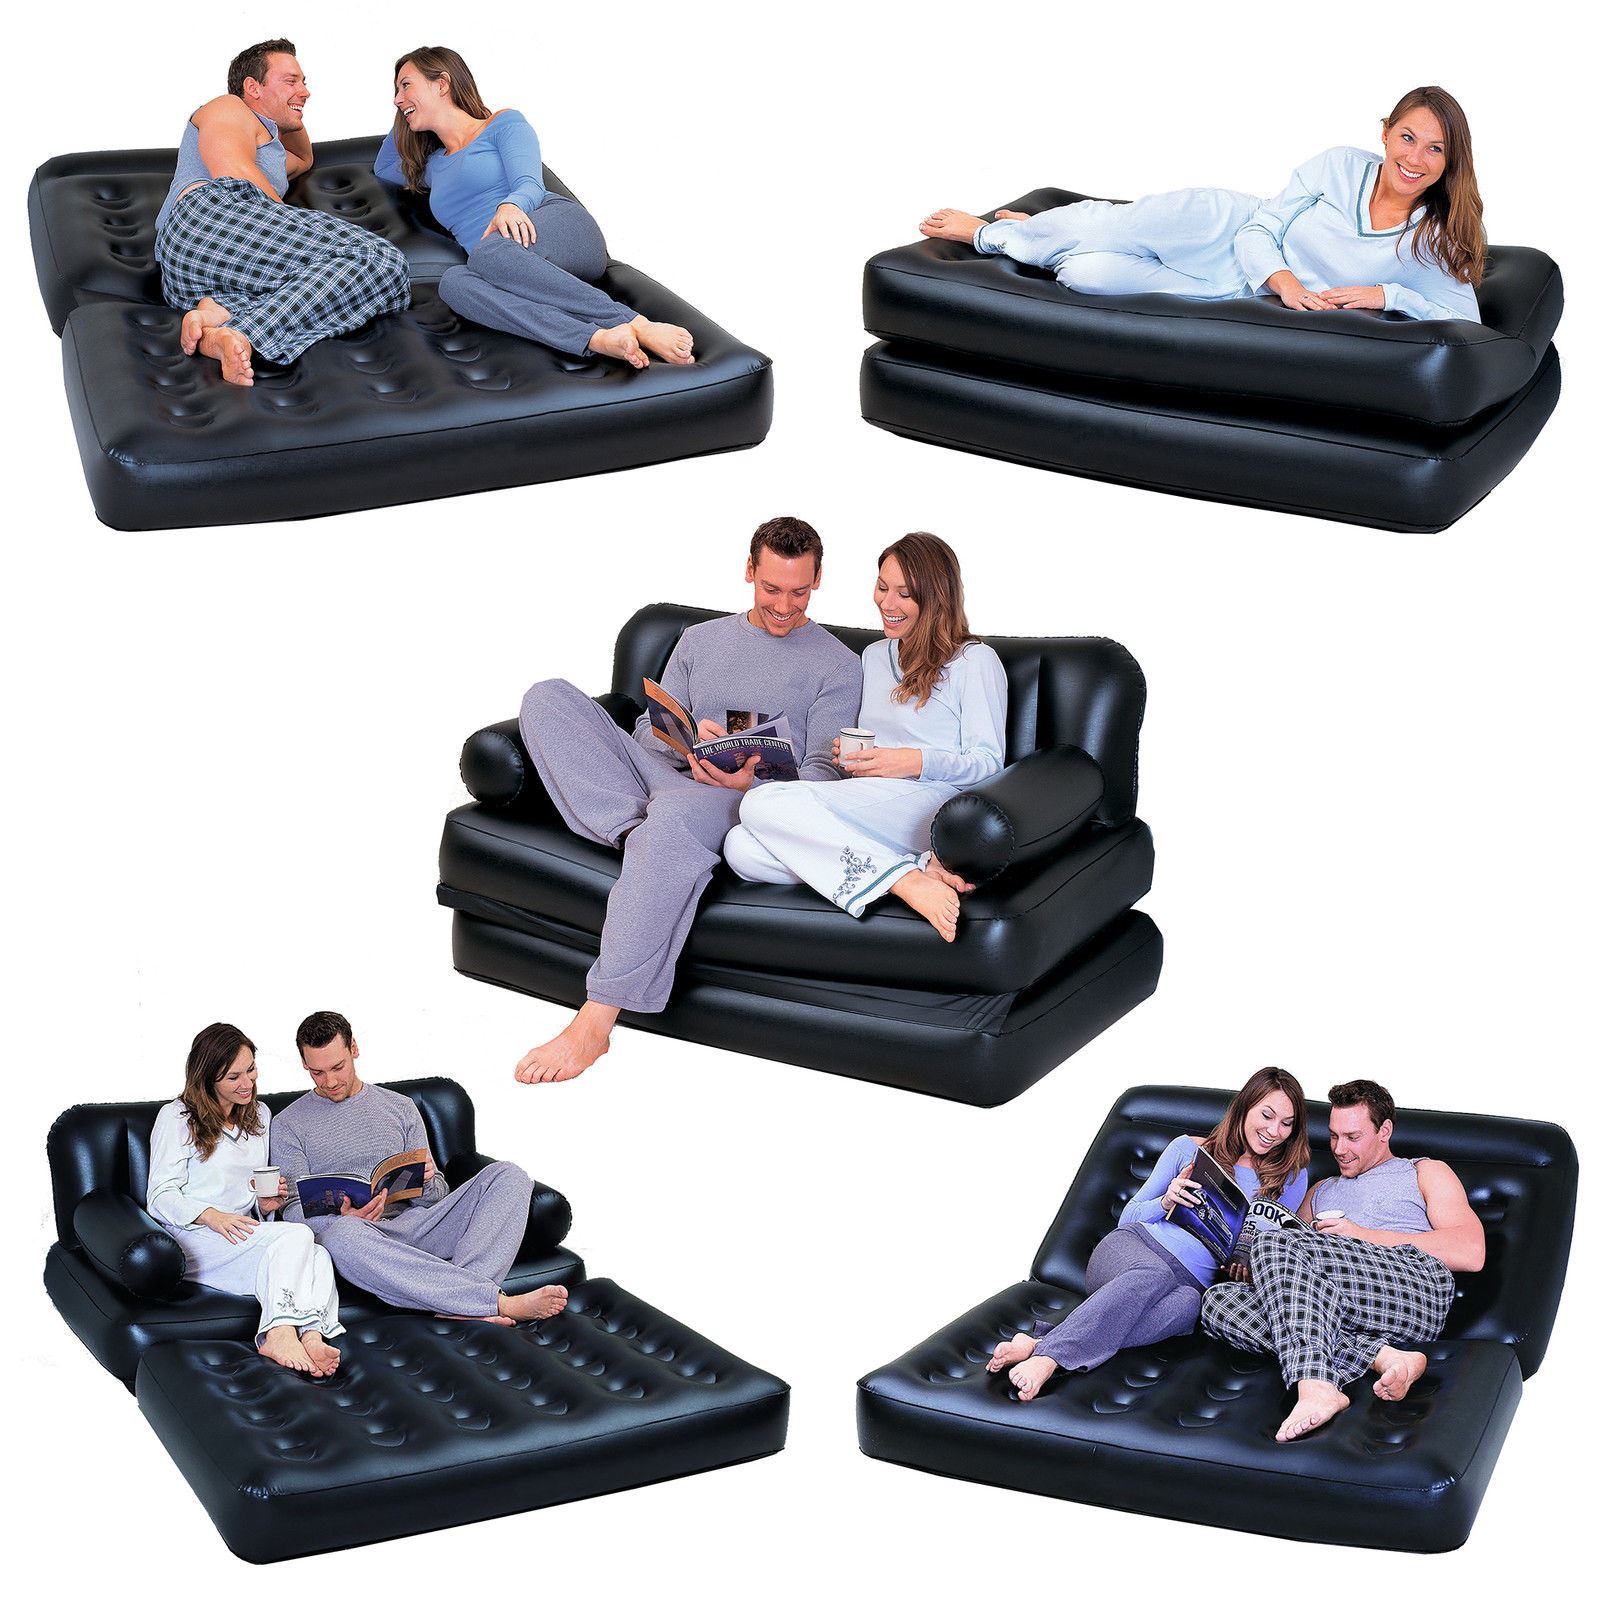 5 in 1 air sofa bed | Nep Hot Online Shop